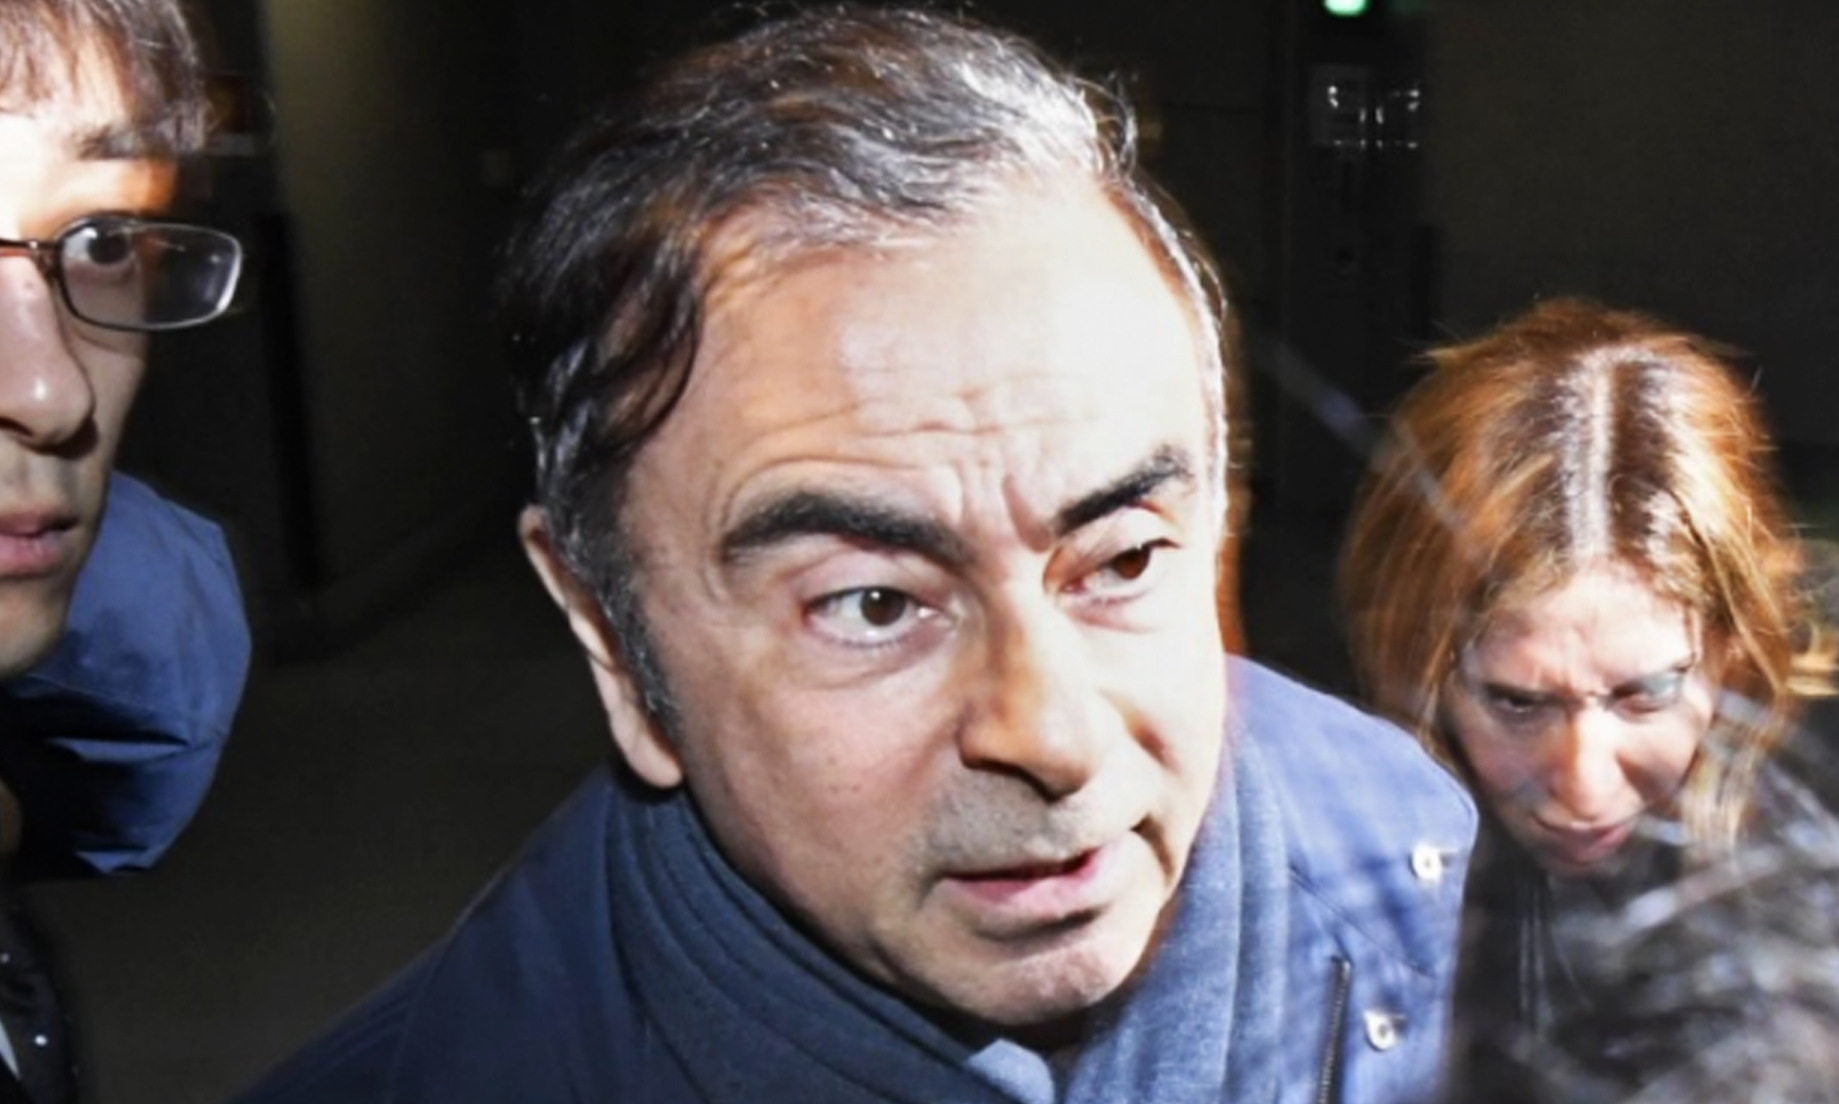 Ex-Nissan boss Carlos Ghosn arrested again, less than month after release